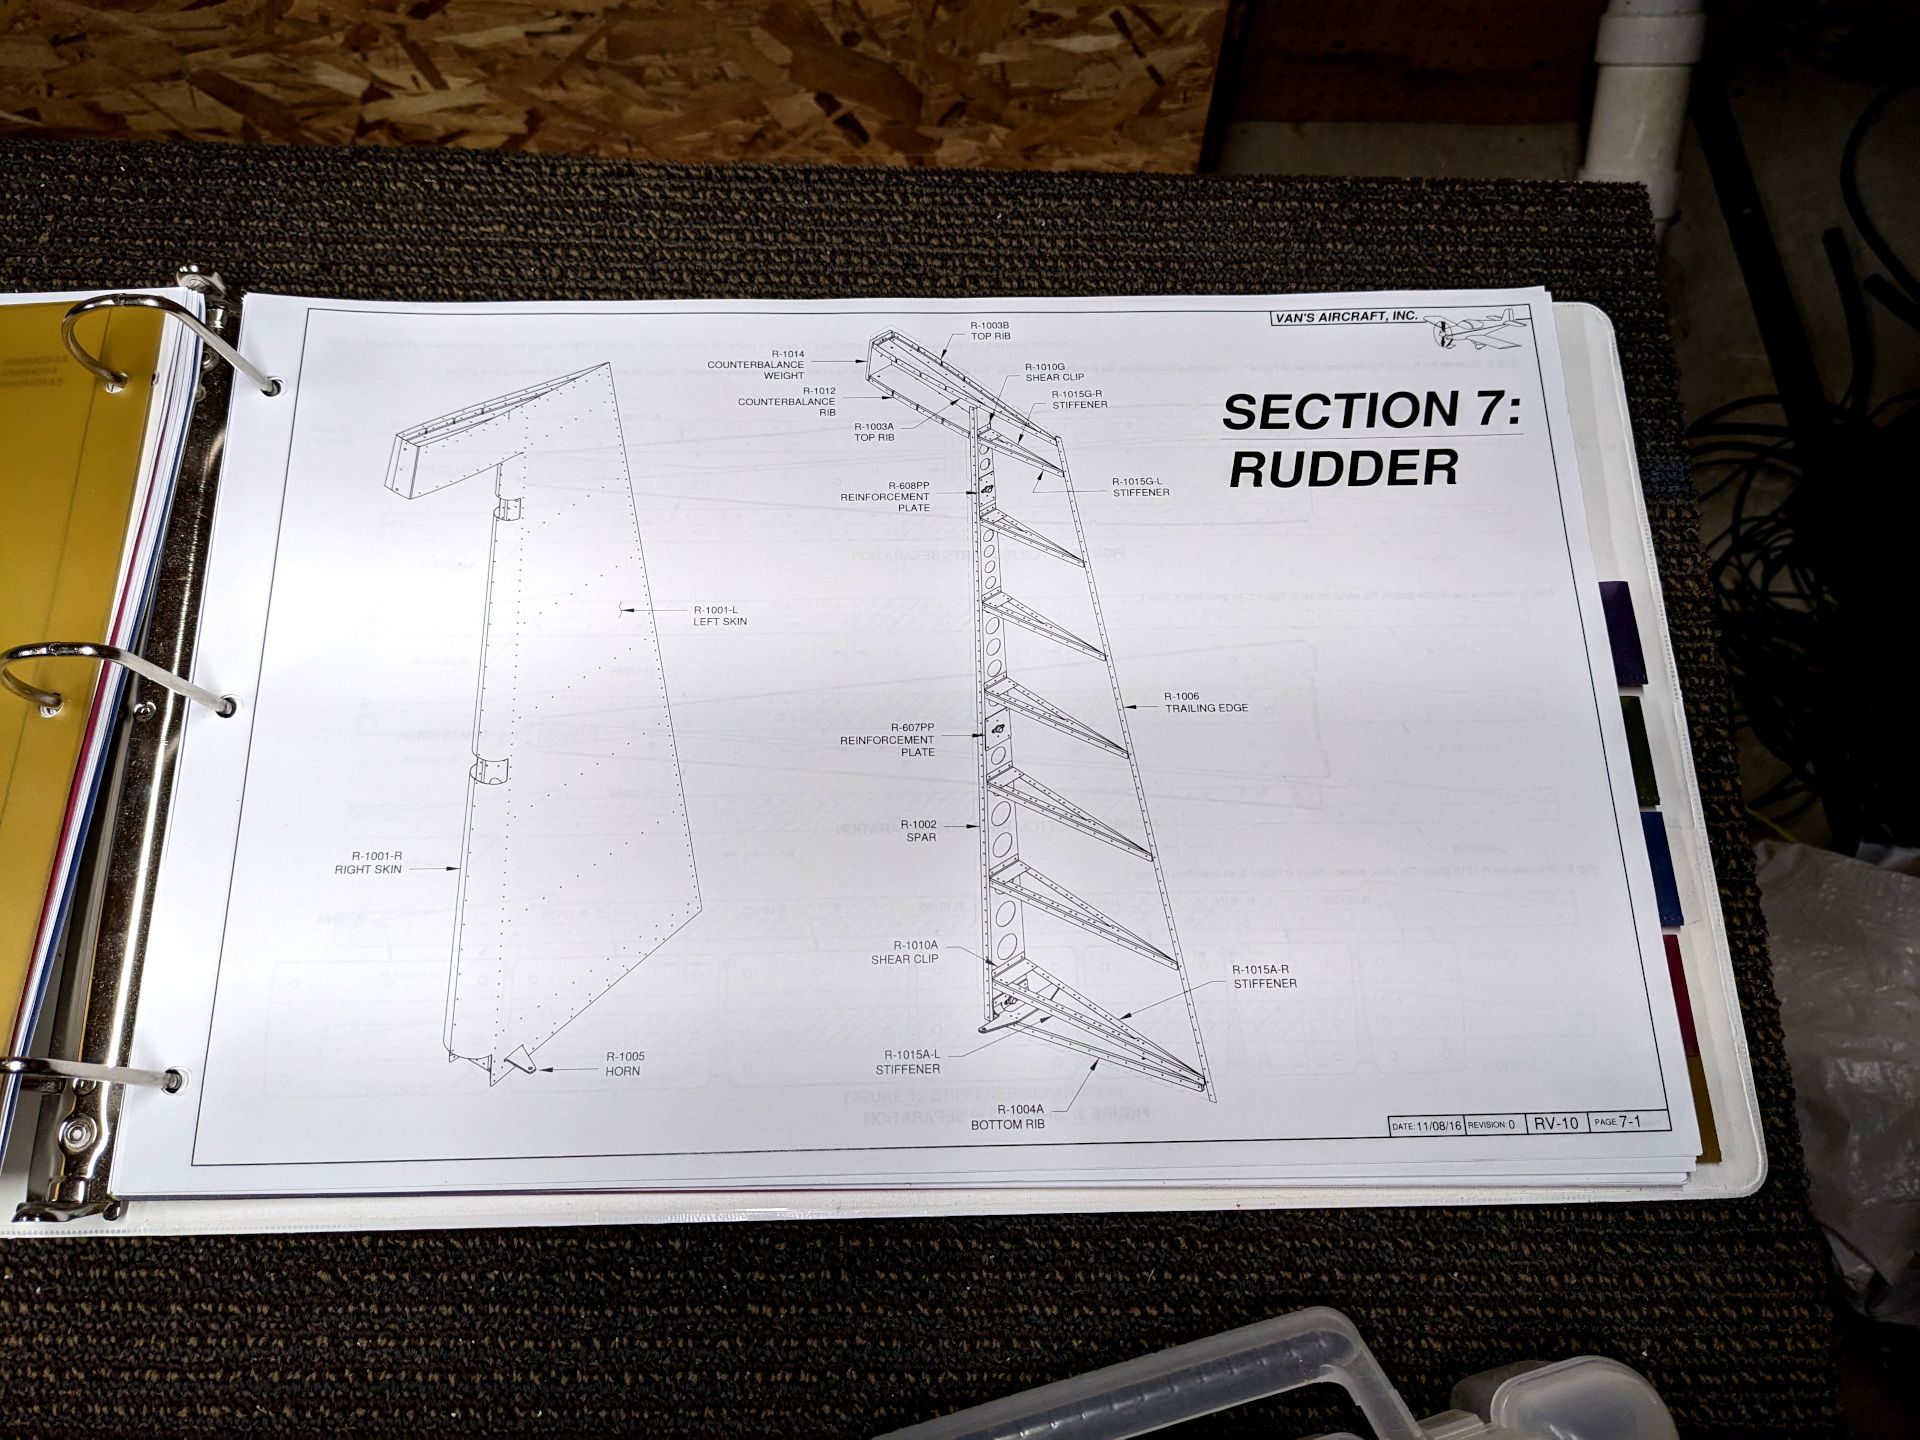 Instruction manual opened to the rudder section. A diagram of the rudder is on the page